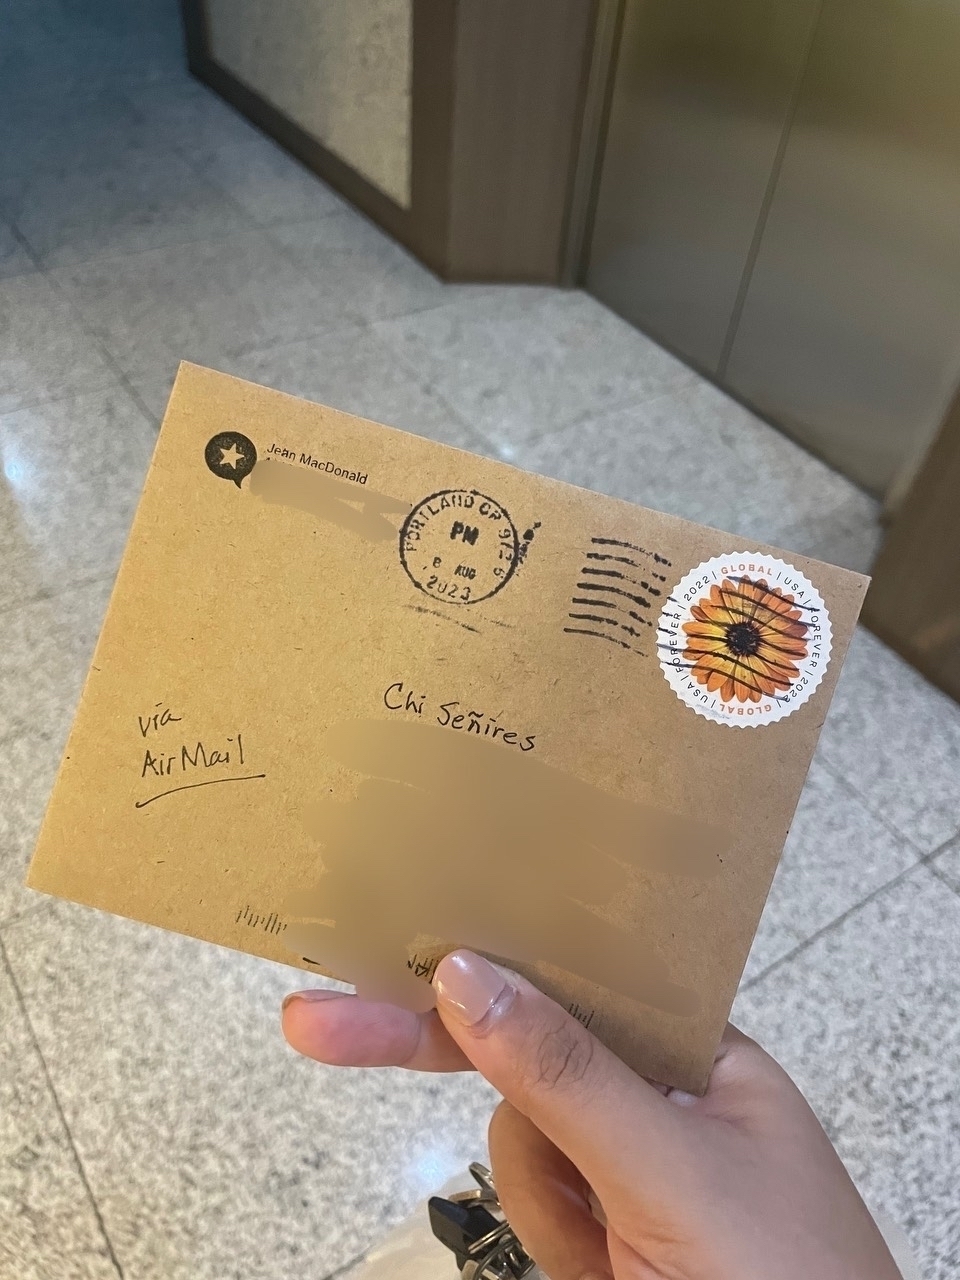 A brown envelope from Jean from Micro.blog, with address details obscured. There is a sunflower stamp on the upper right corner of the envelope, and a written underlined note on the lower left which reads, "via AirMail".